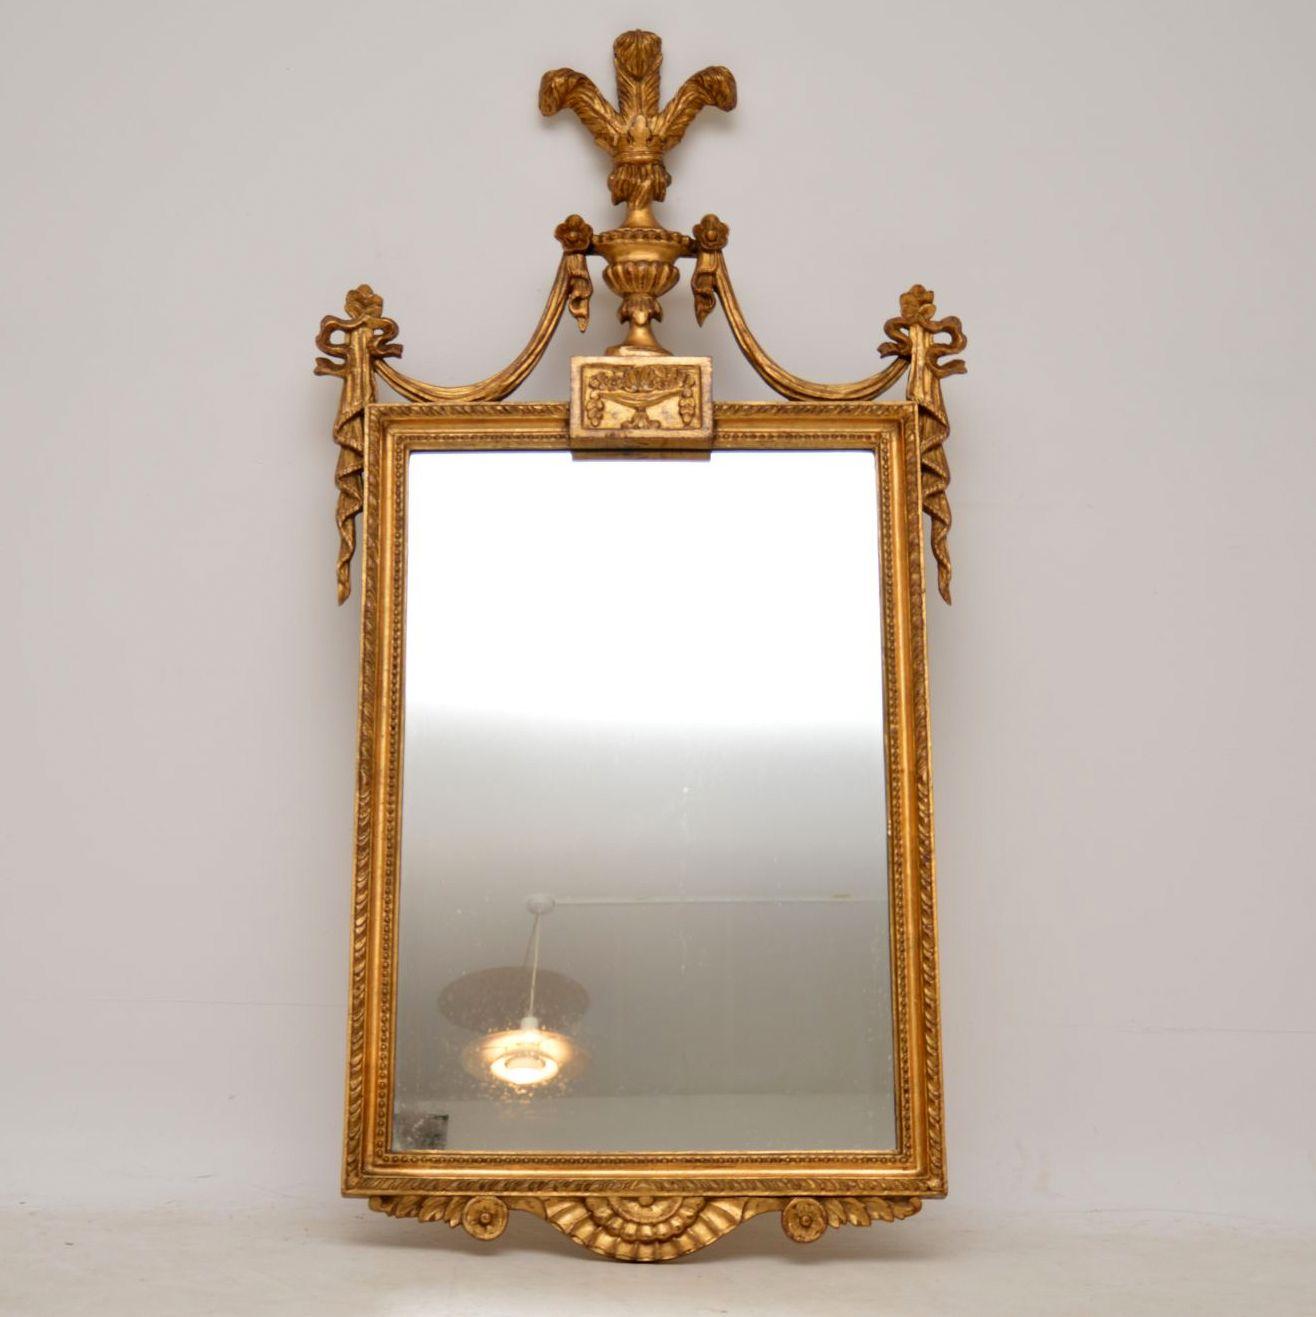 Antique Italian carved giltwood mirror in excellent original condition and dating from circa 1920s period. The giltwood frame has many lovely classical features, including the ‘Prince of Wales Feathers’ on the top. The mirror glass is also in good